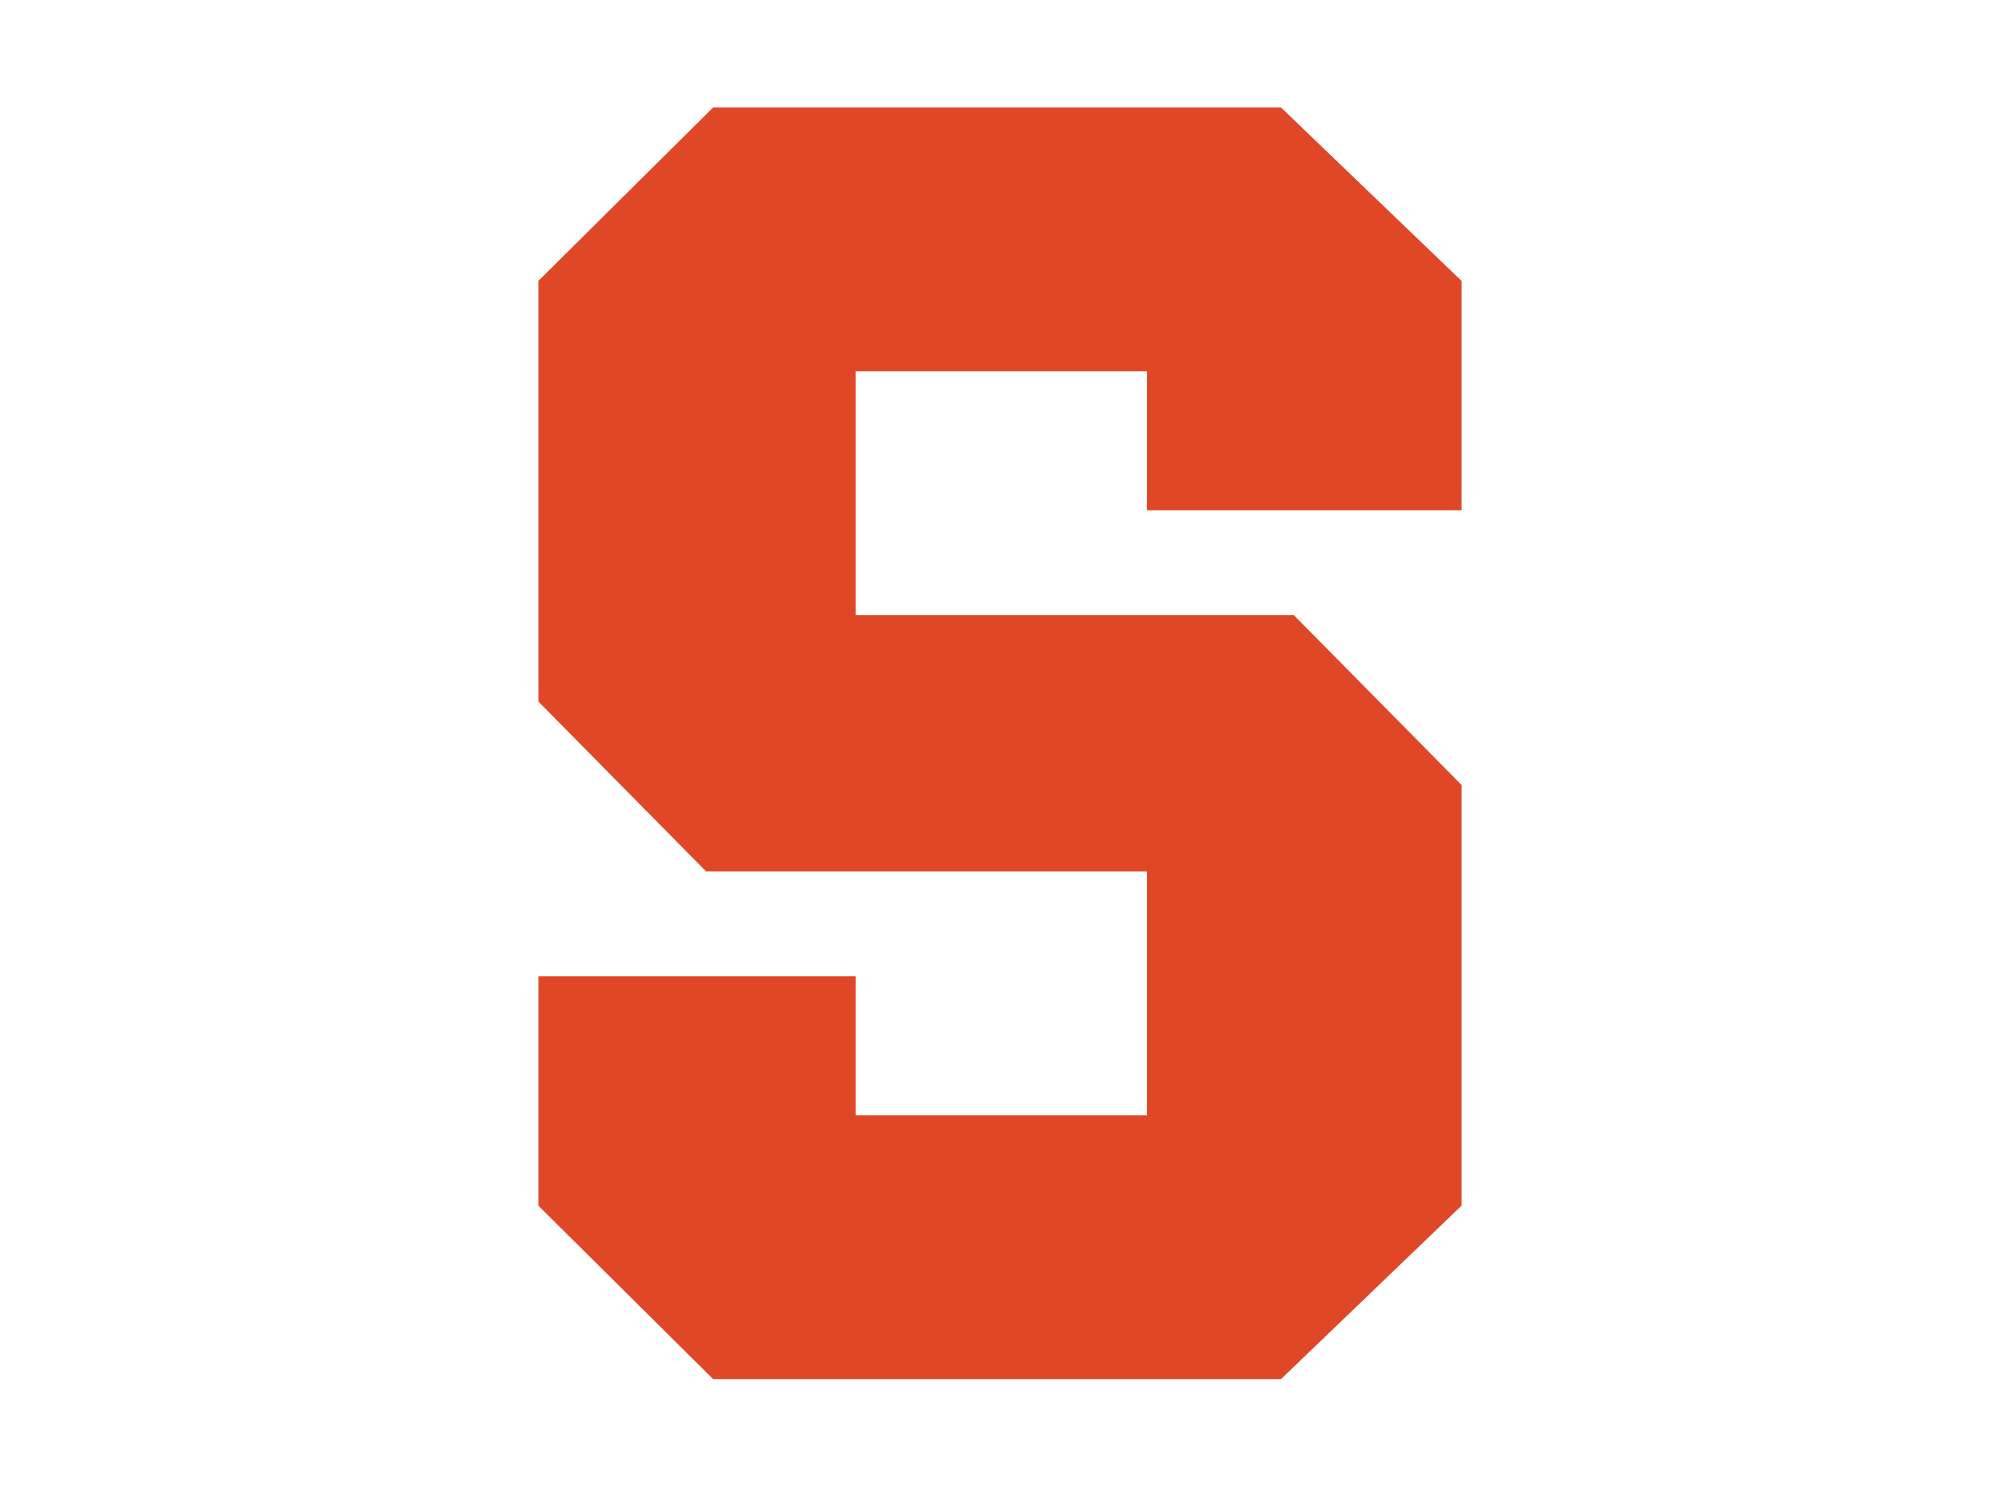 Syracuse Logo - UPDATE: Syracuse fraternity permanently expelled over racist video